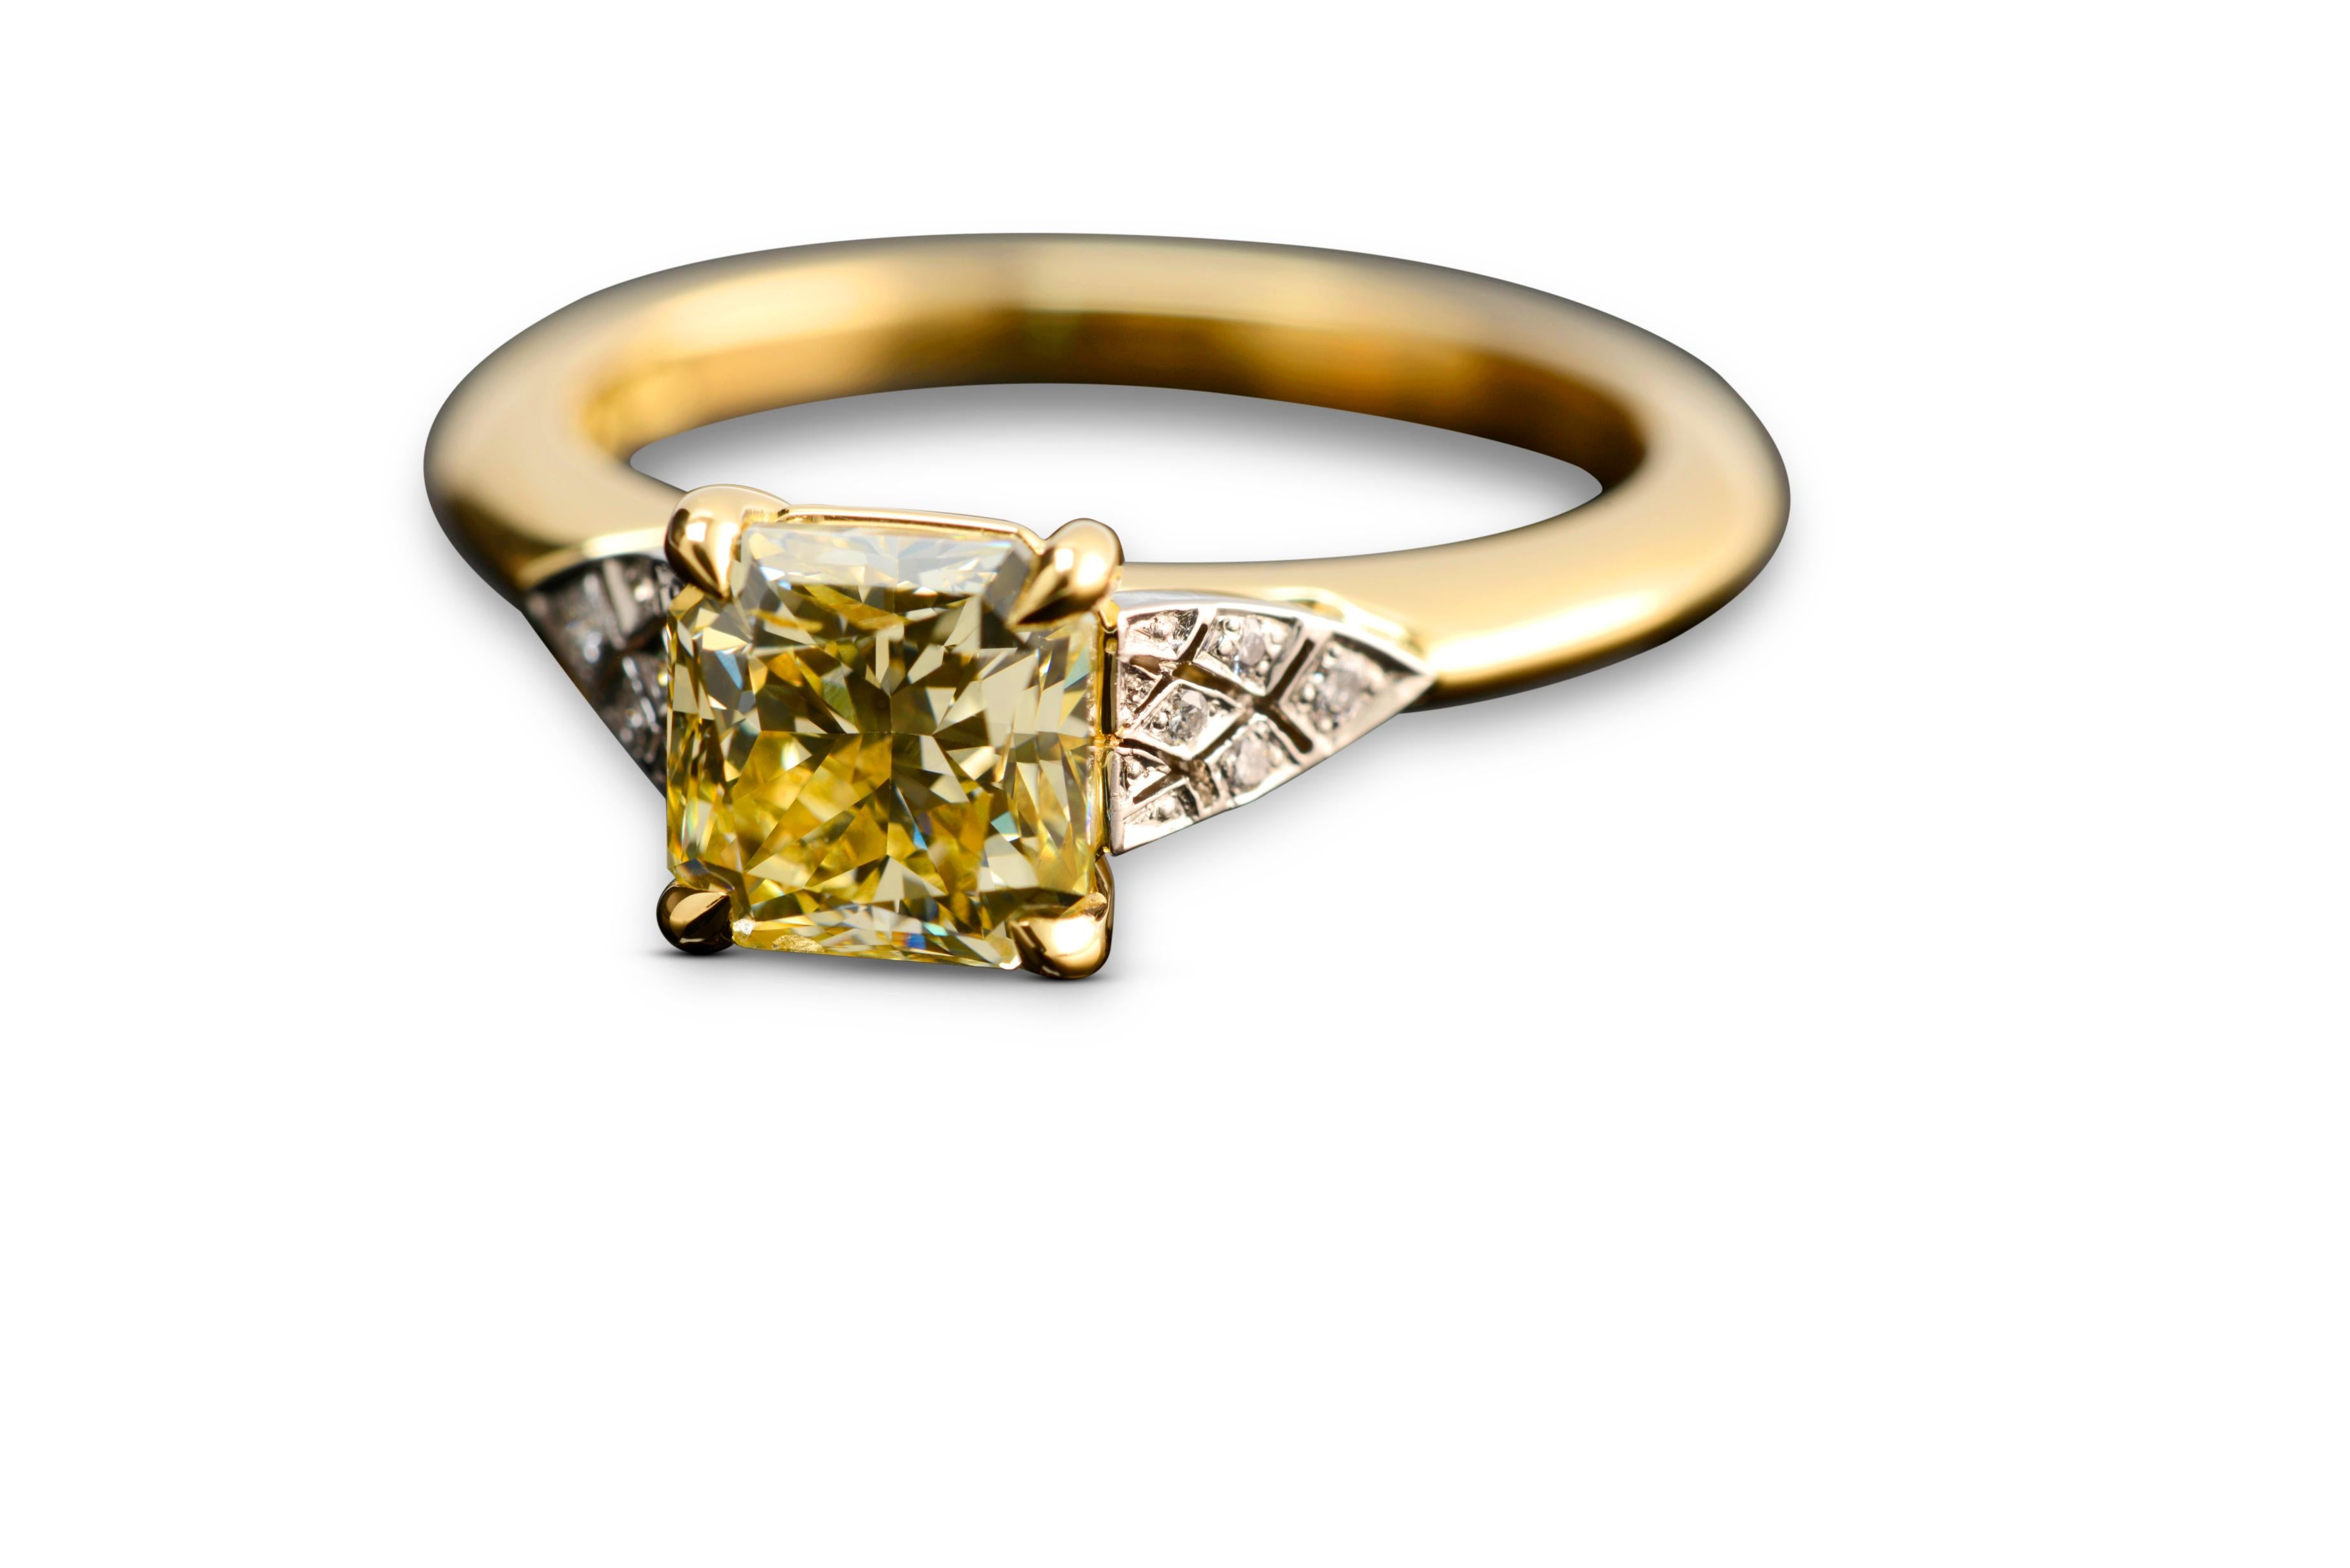 Handmade by Nicky Burles is a 2.03 carat fancy yellow radiant cut diamond solitaire engagement ring. This two tone beauty features an 18 karat yellow gold 4 claw setting and soft knife edge band. The shoulders of the ring are detailed with an